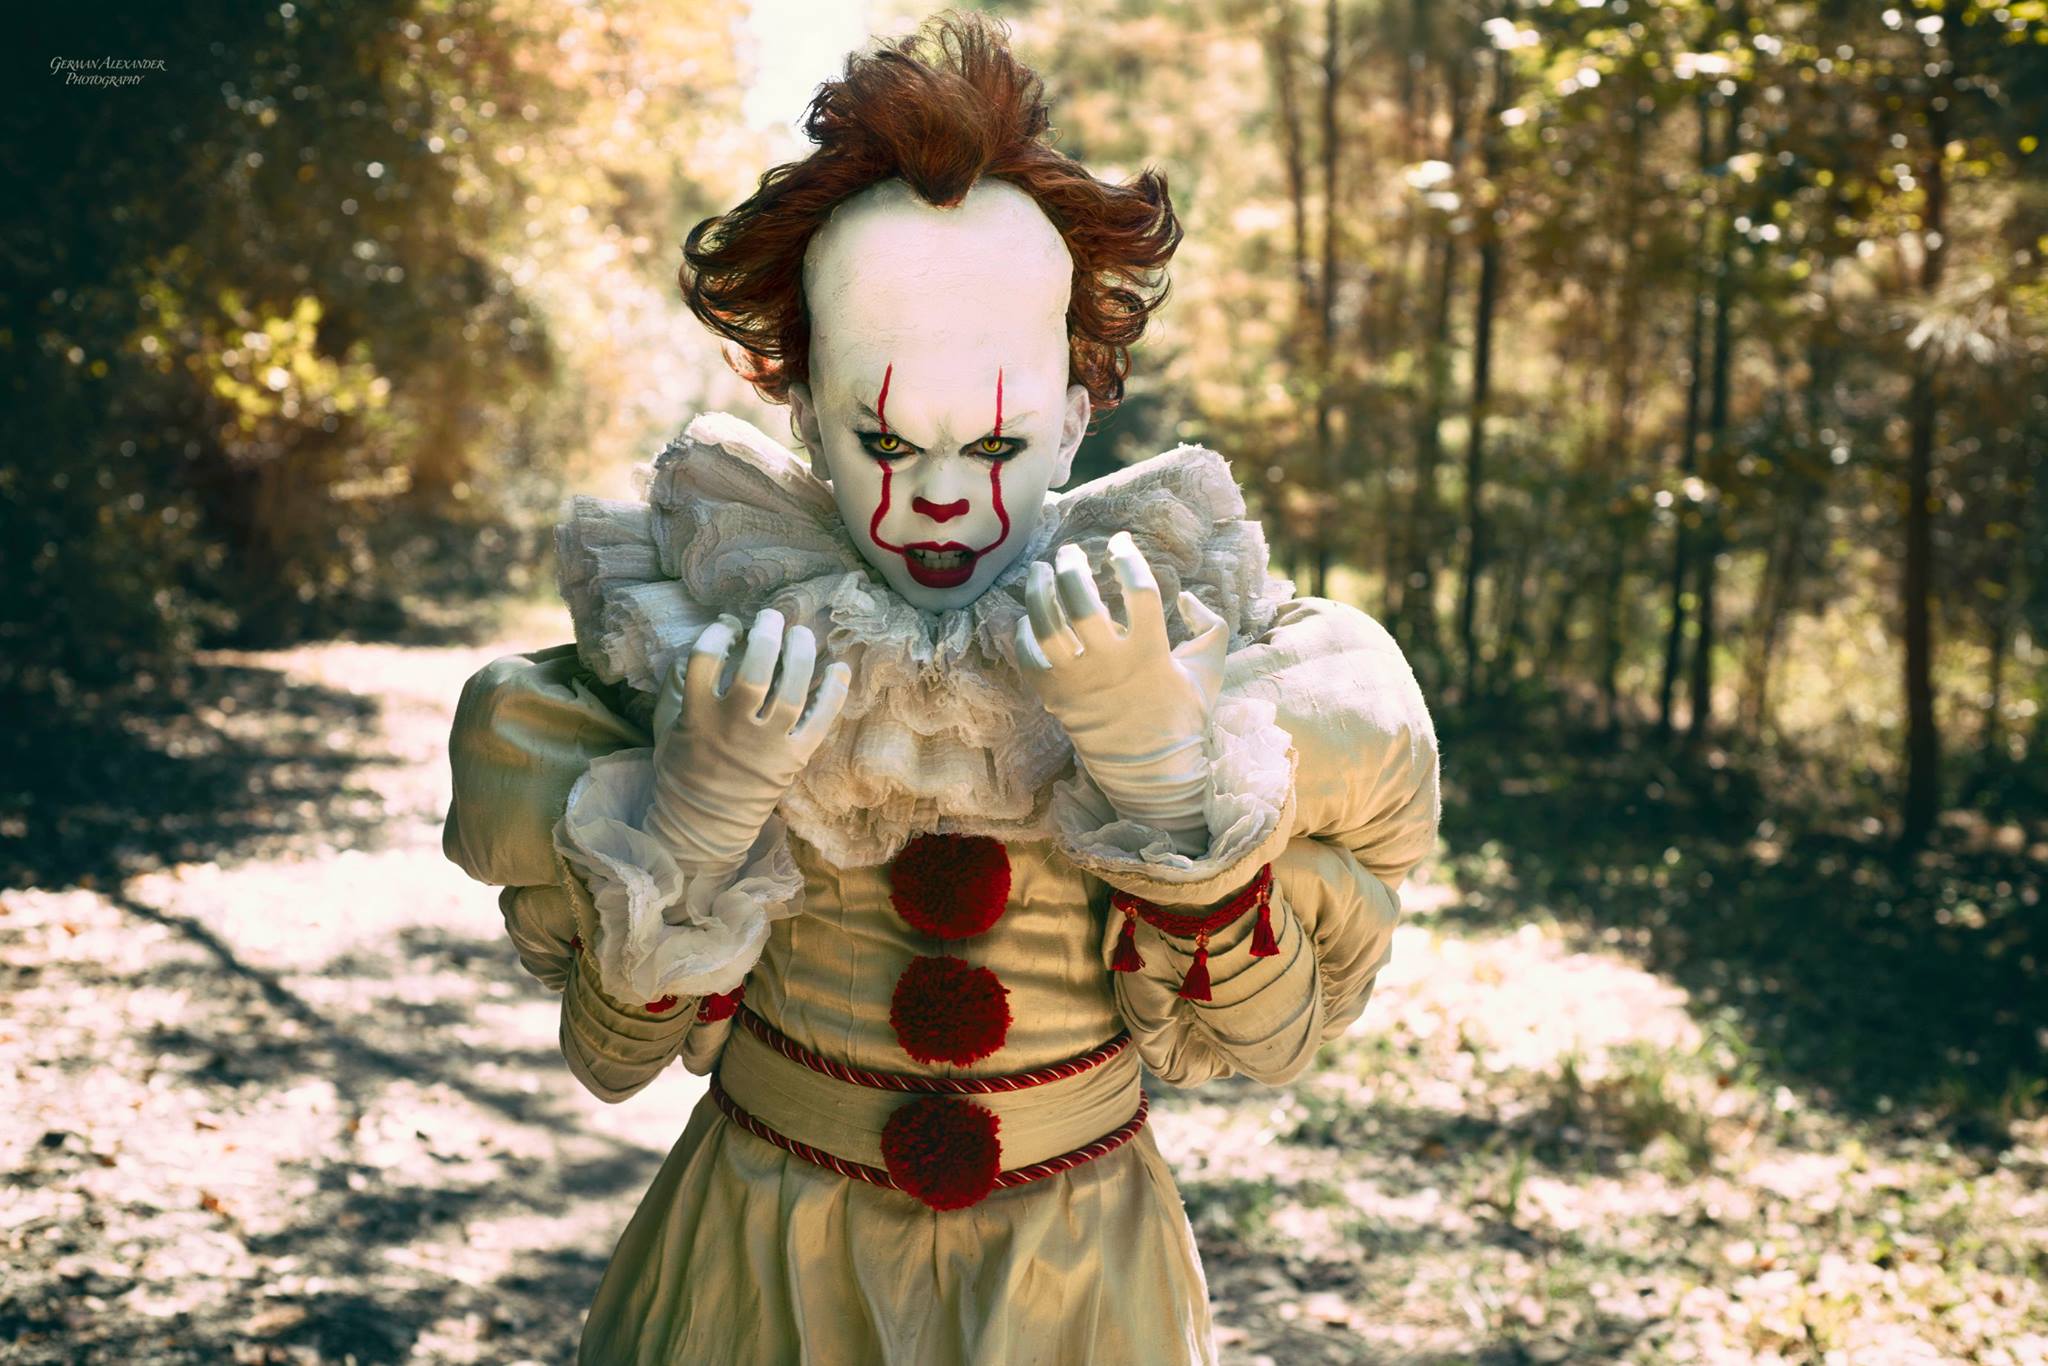 Houston's reigning cosplay prince dresses as Pennywise the clown in new photoshoot ...2048 x 1366